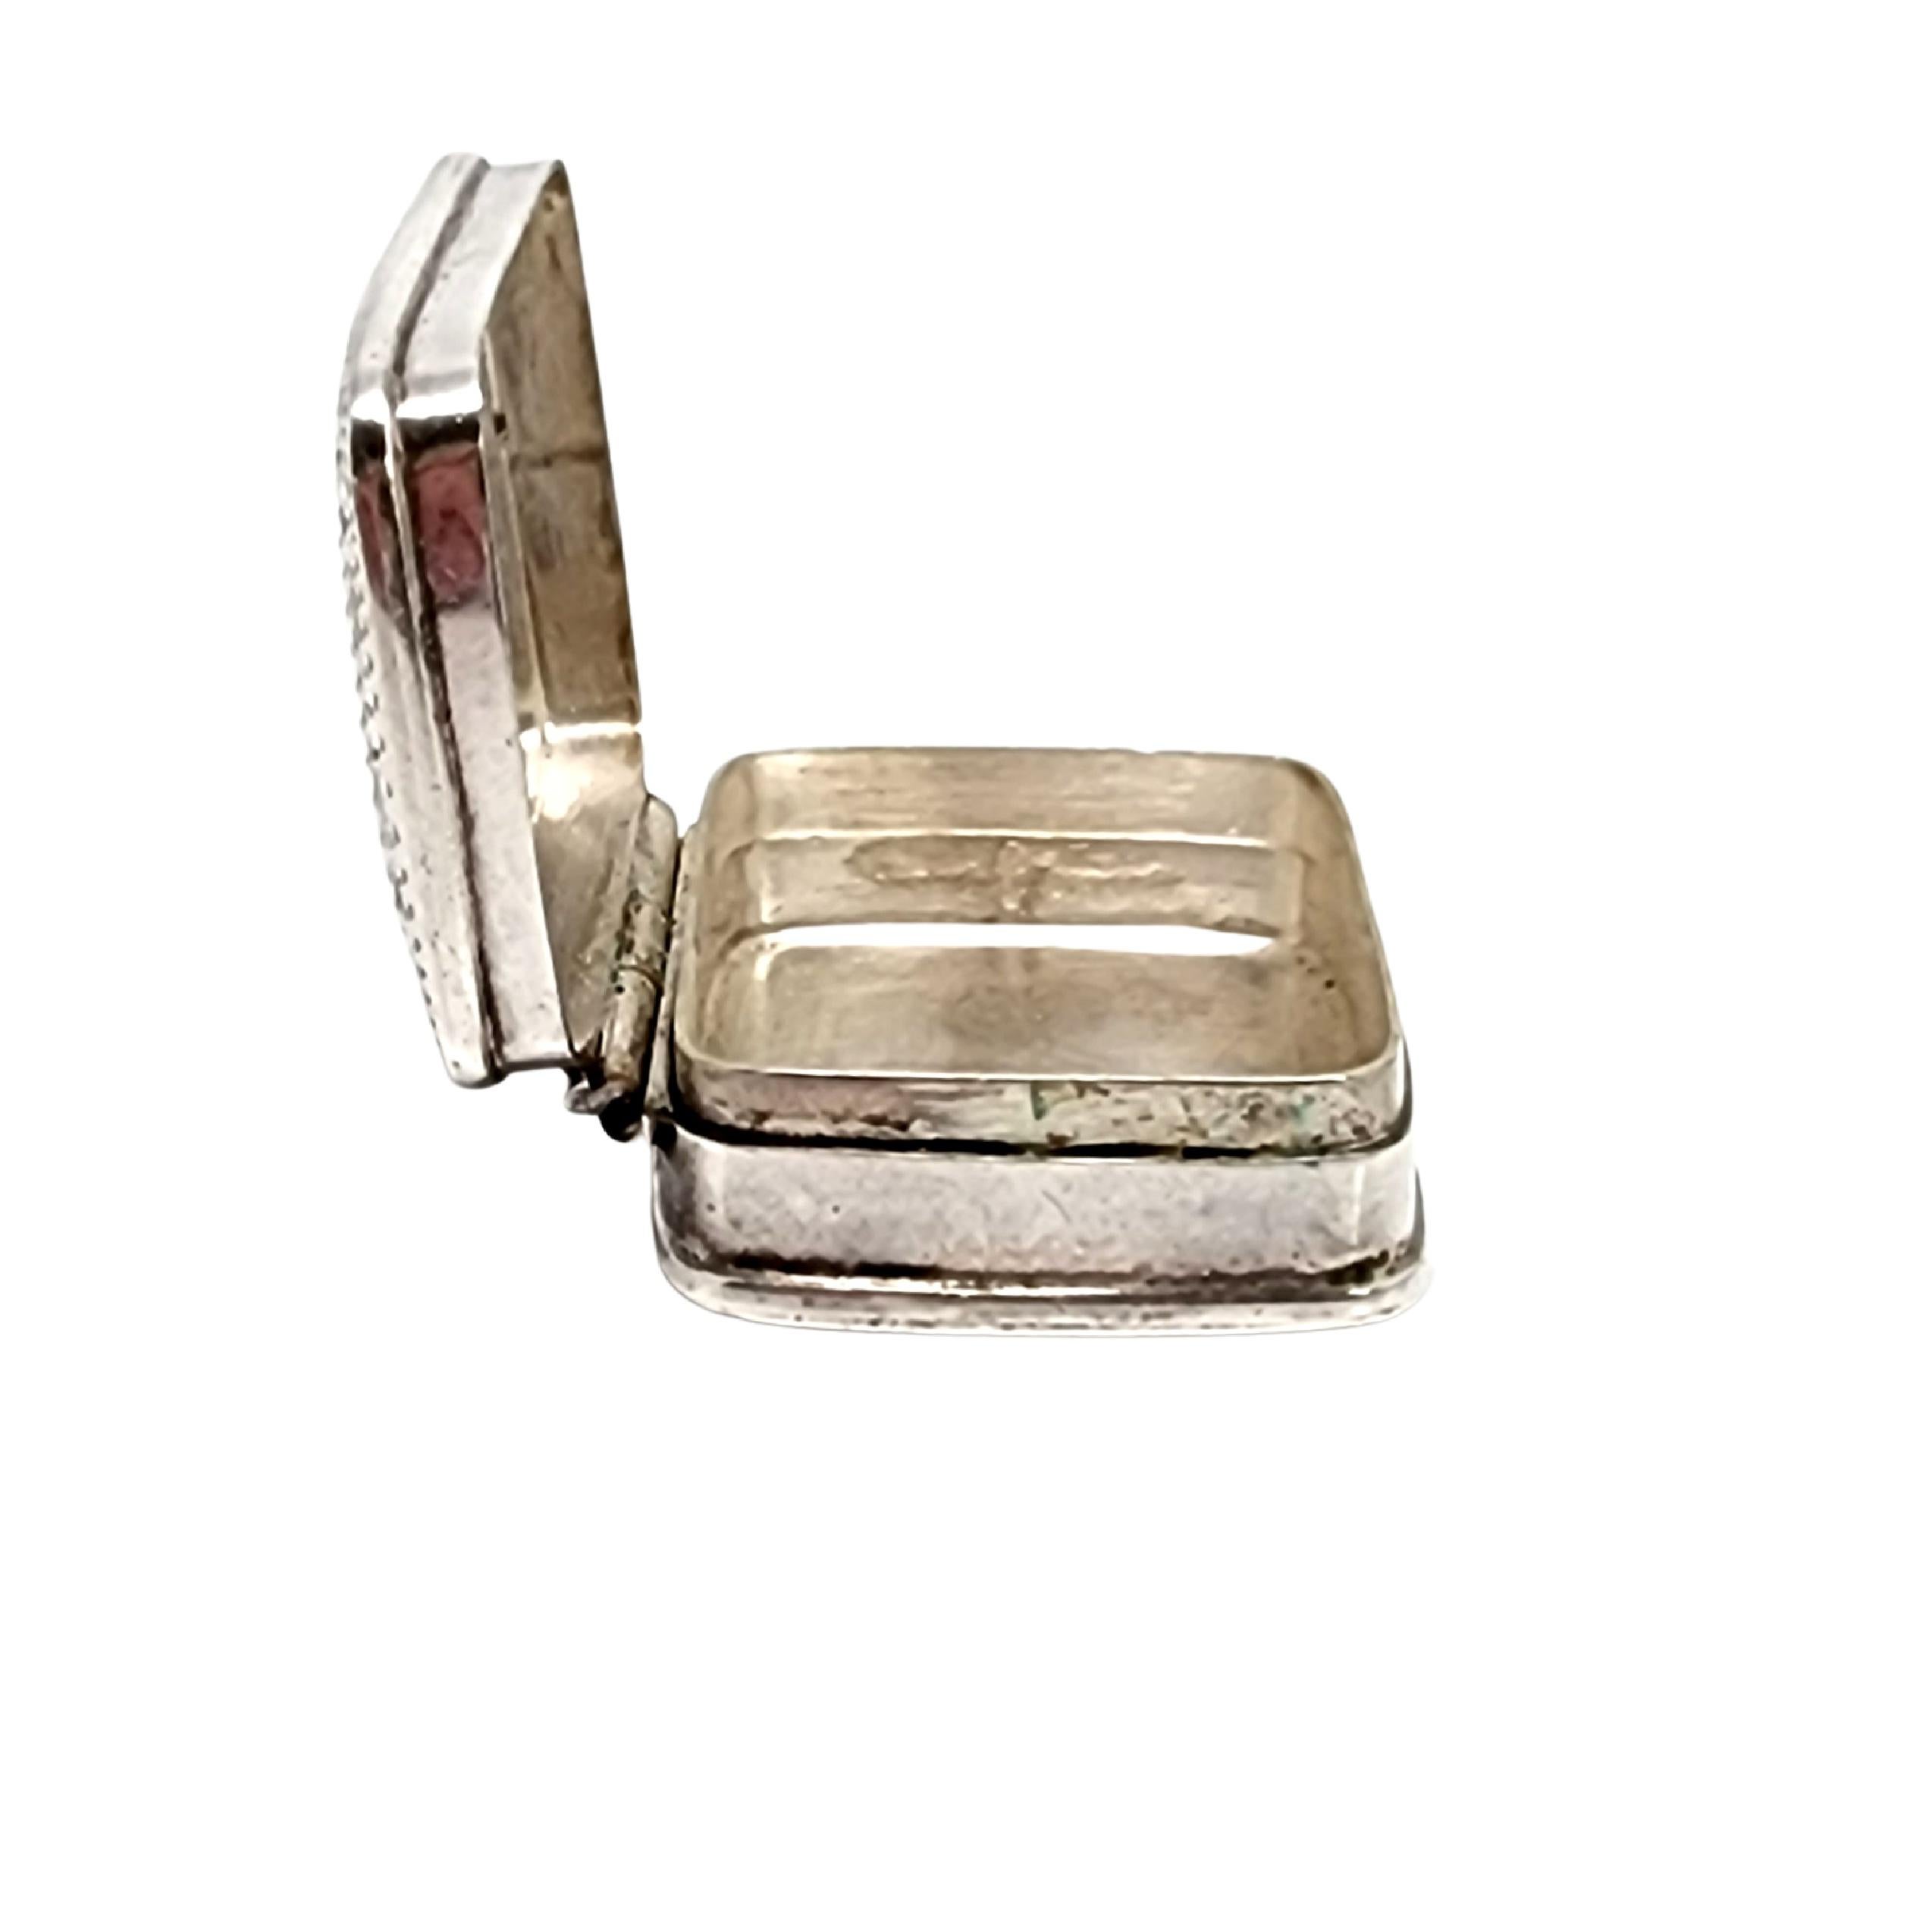 Sterling silver rectangular trinket/pill box.

This is a beautiful example of the small decorative boxes used to carry pills or snuff. Hinged lid. Etched frame design on lid.

Measures 1 3/8